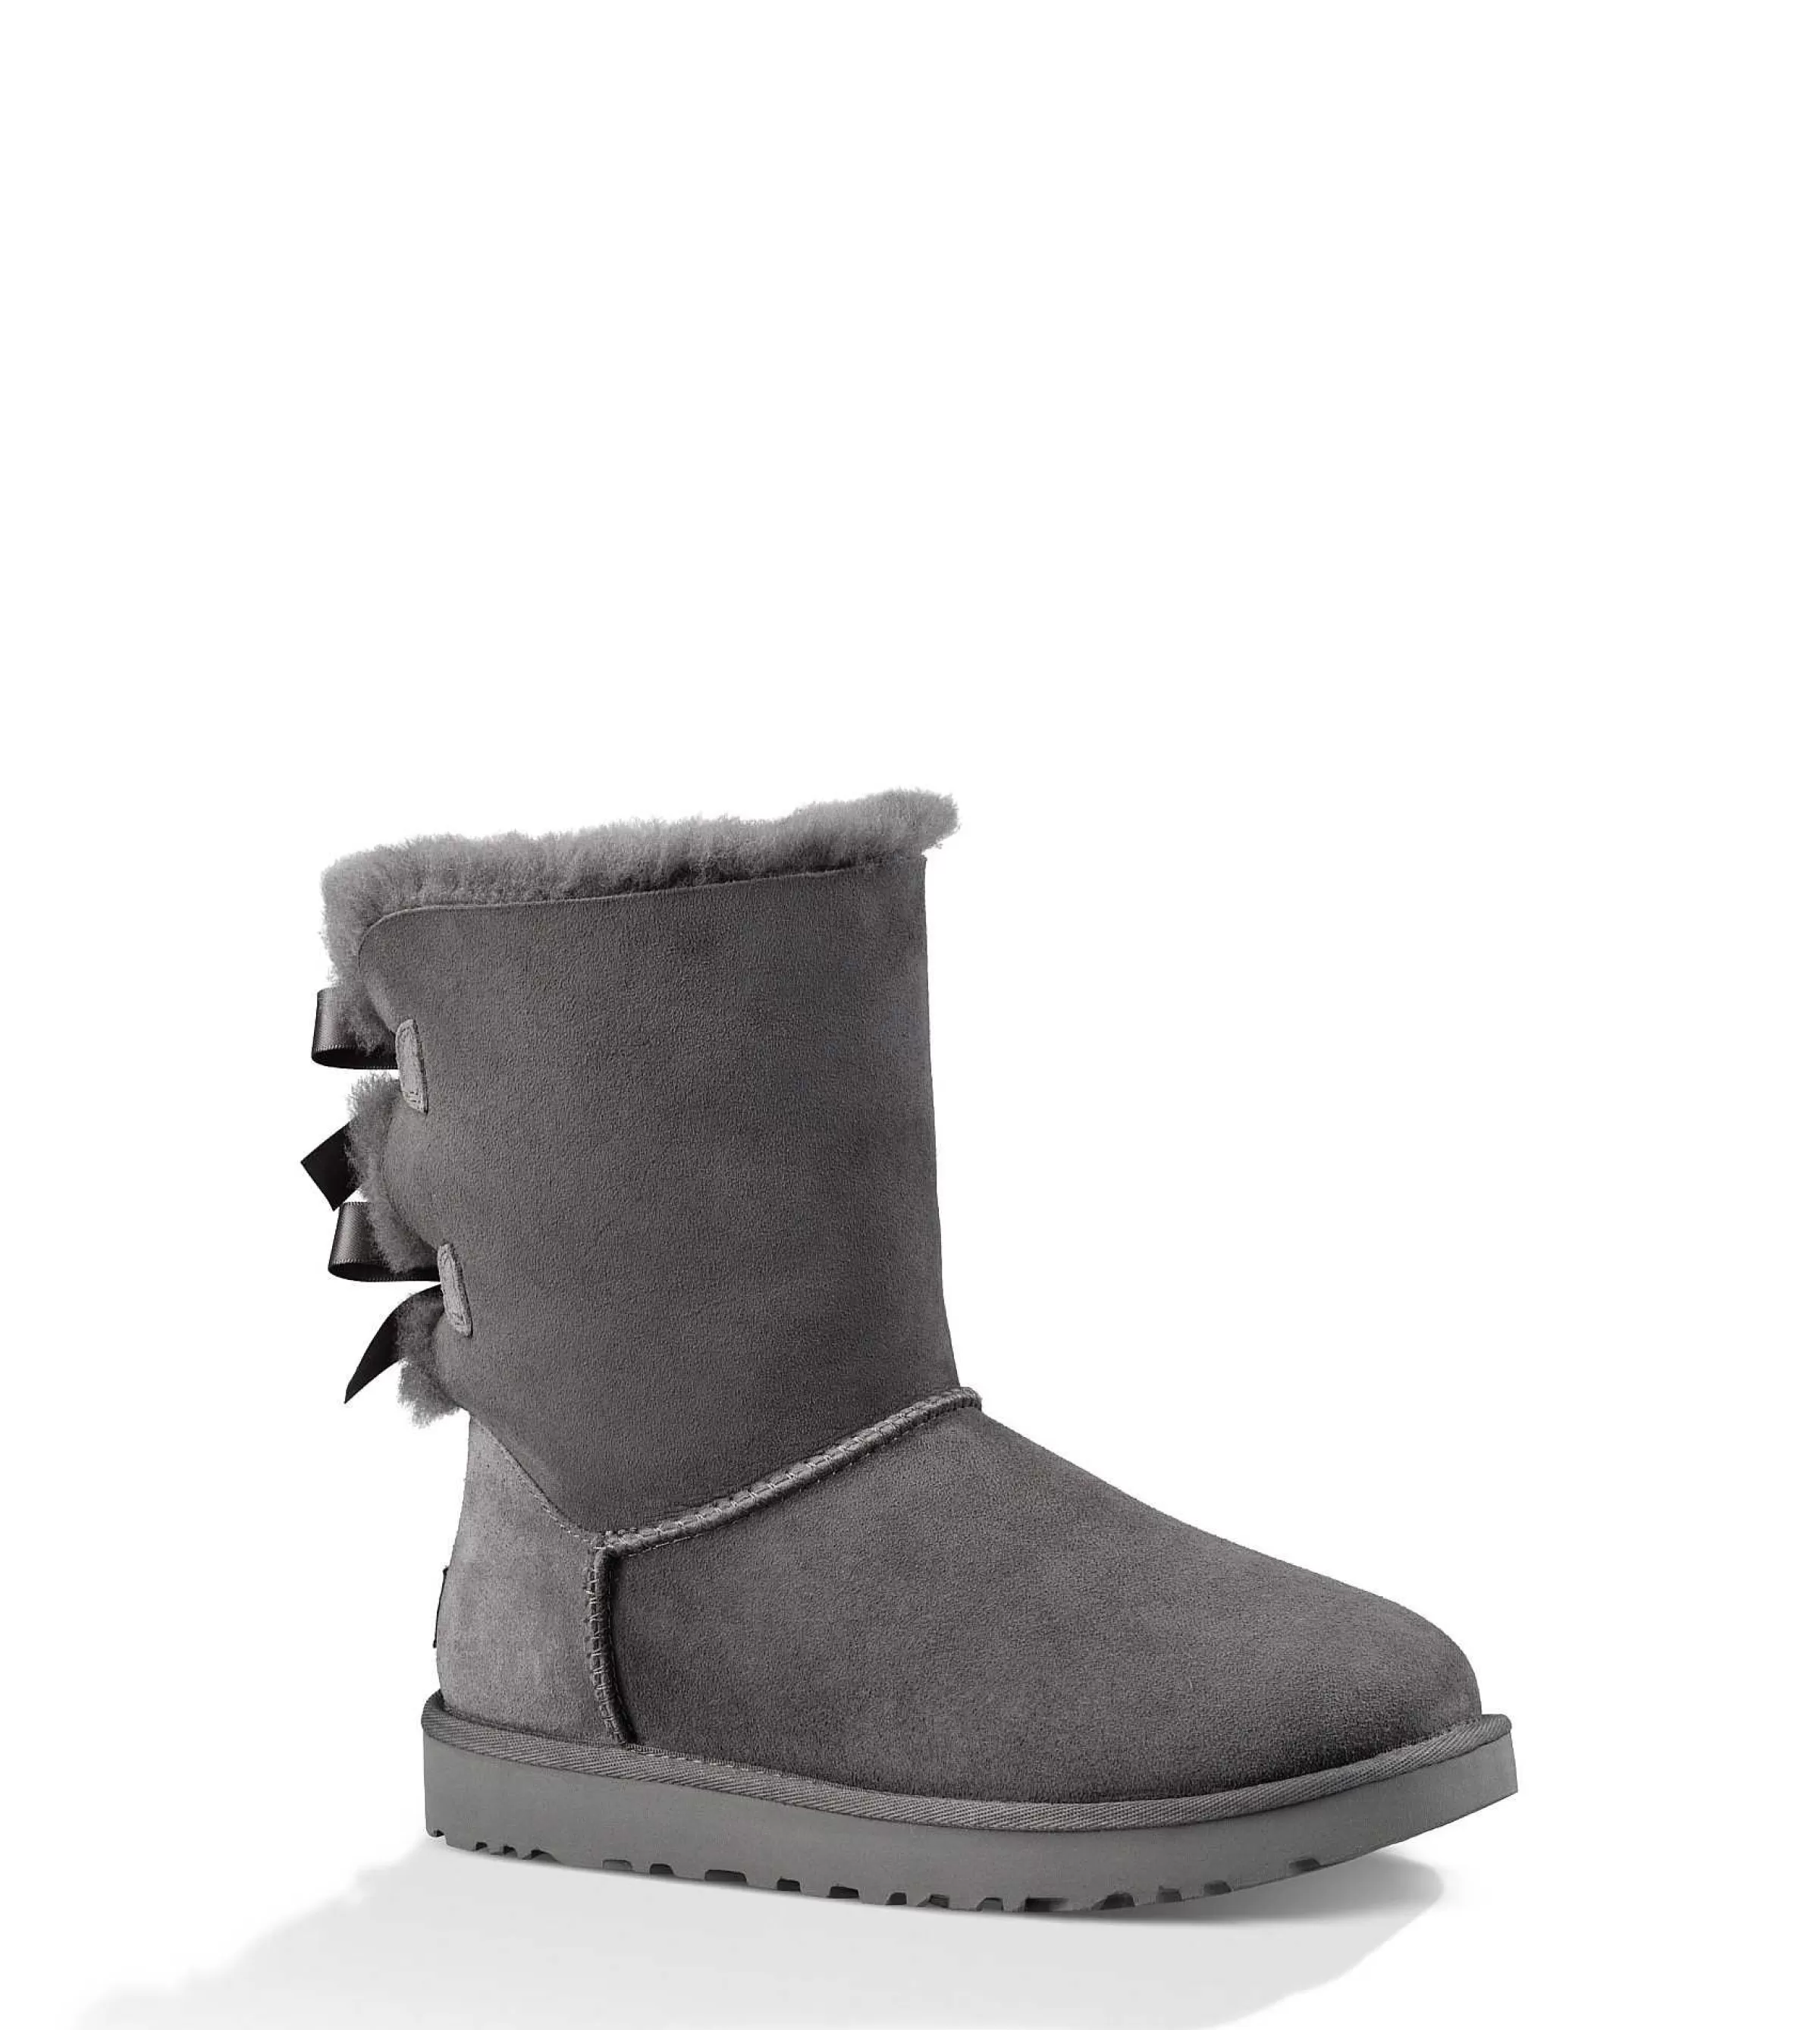 Bottes Classiques-UGG Bailey Bow II, Gris